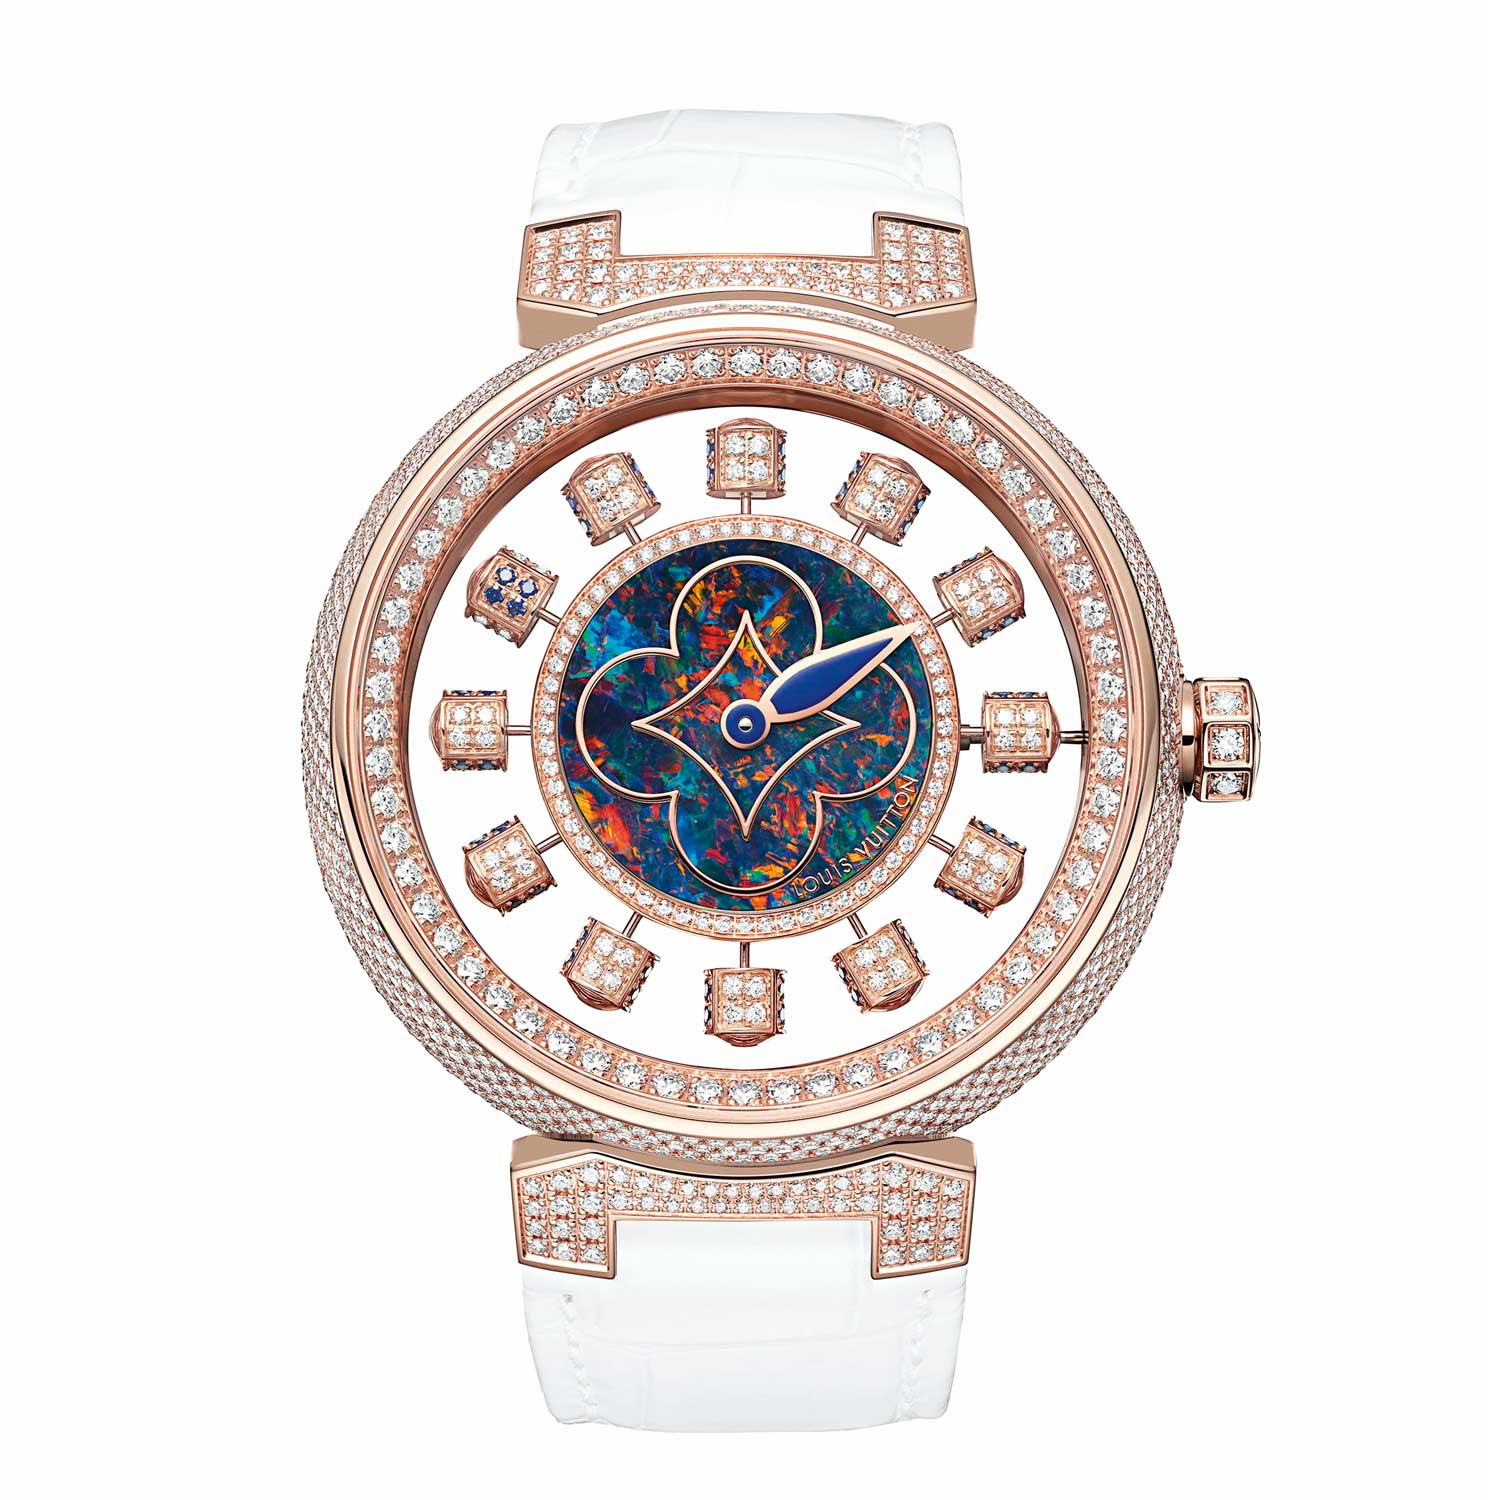 Louis Vuitton Tambour Spin Time Air Opal in diamond-encrusted pink gold case